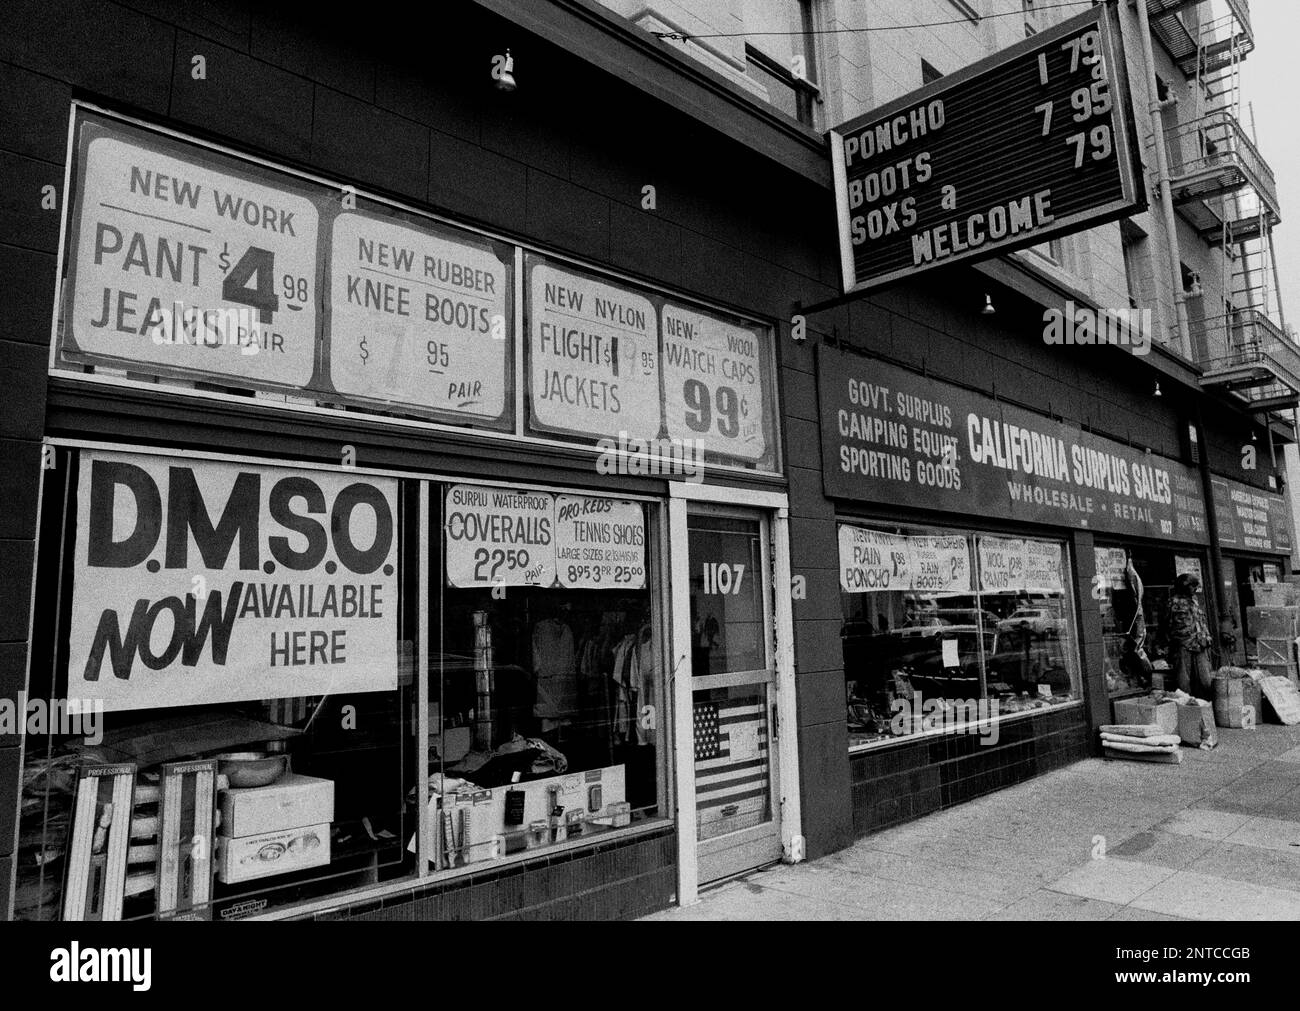 https://c8.alamy.com/comp/2NTCCGB/california-surplus-sales-store-in-downtown-san-francisco-california-in-the-1970s-2NTCCGB.jpg